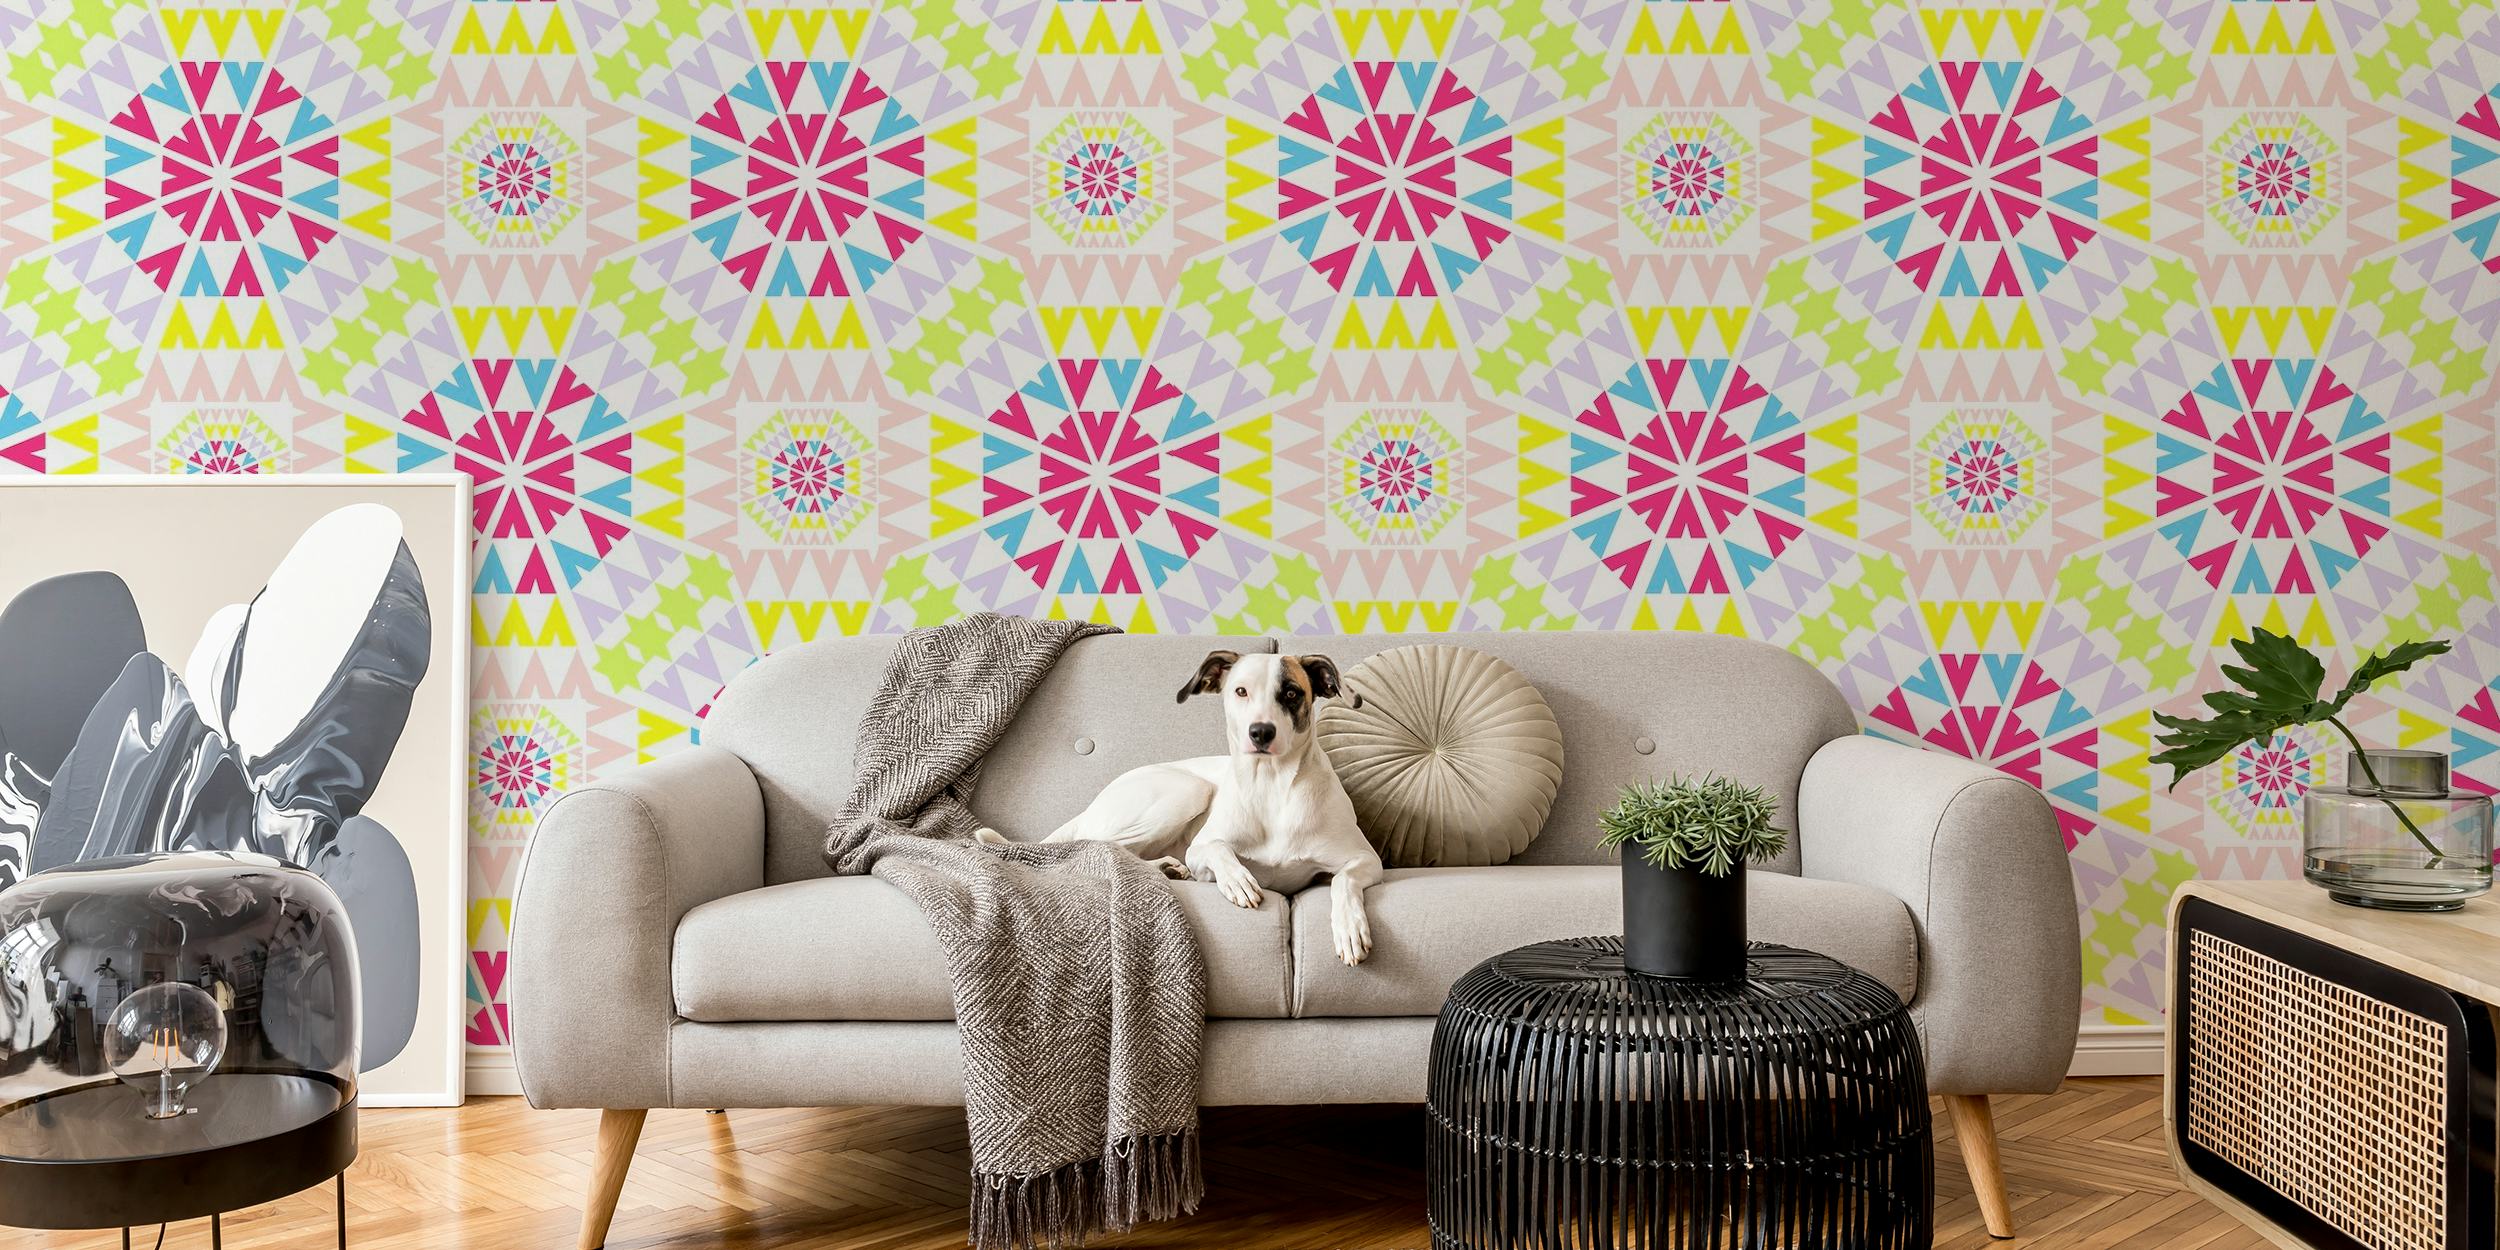 Colorful mosaic patterned 'Letter V' wall mural design from Happywall with pink, blue, and yellow motifs on cream background